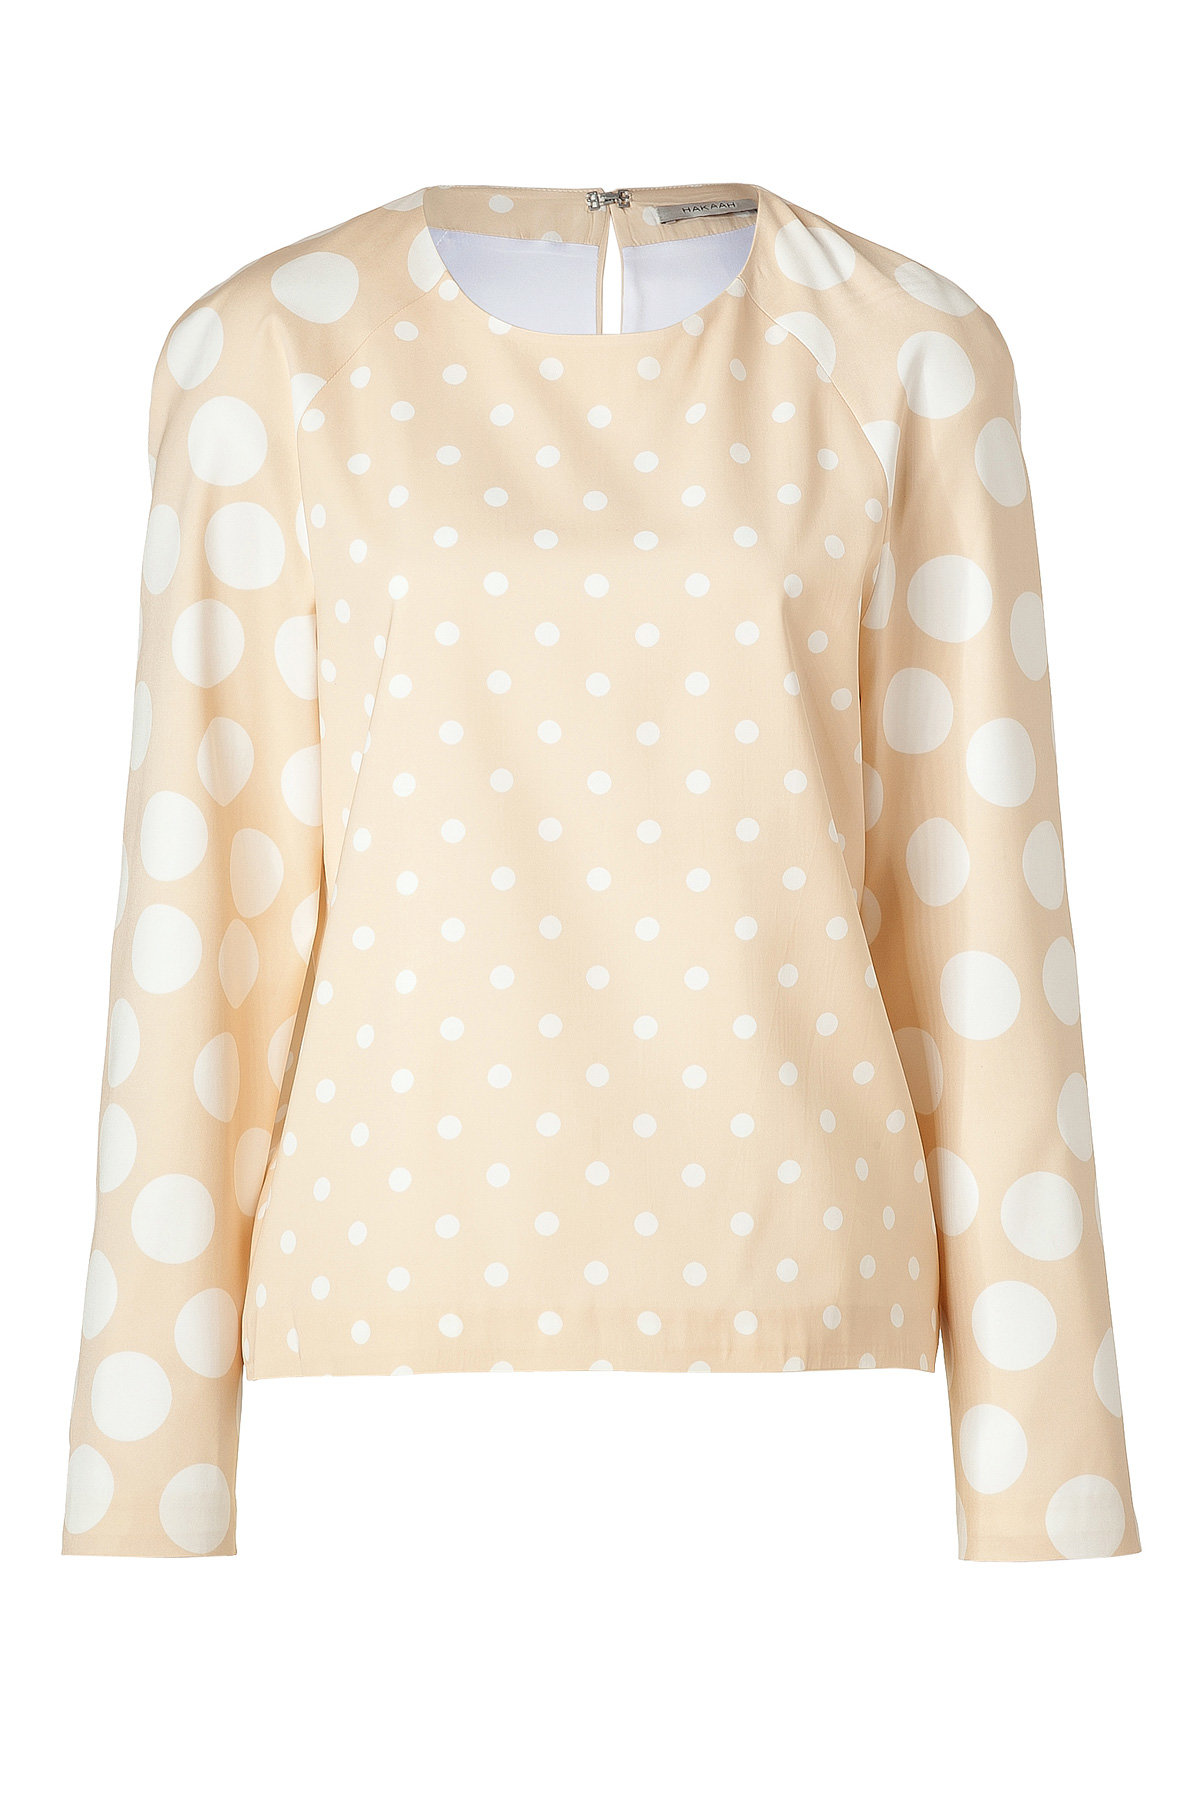 Nude/White Dotted Adonide Top by Hakaan